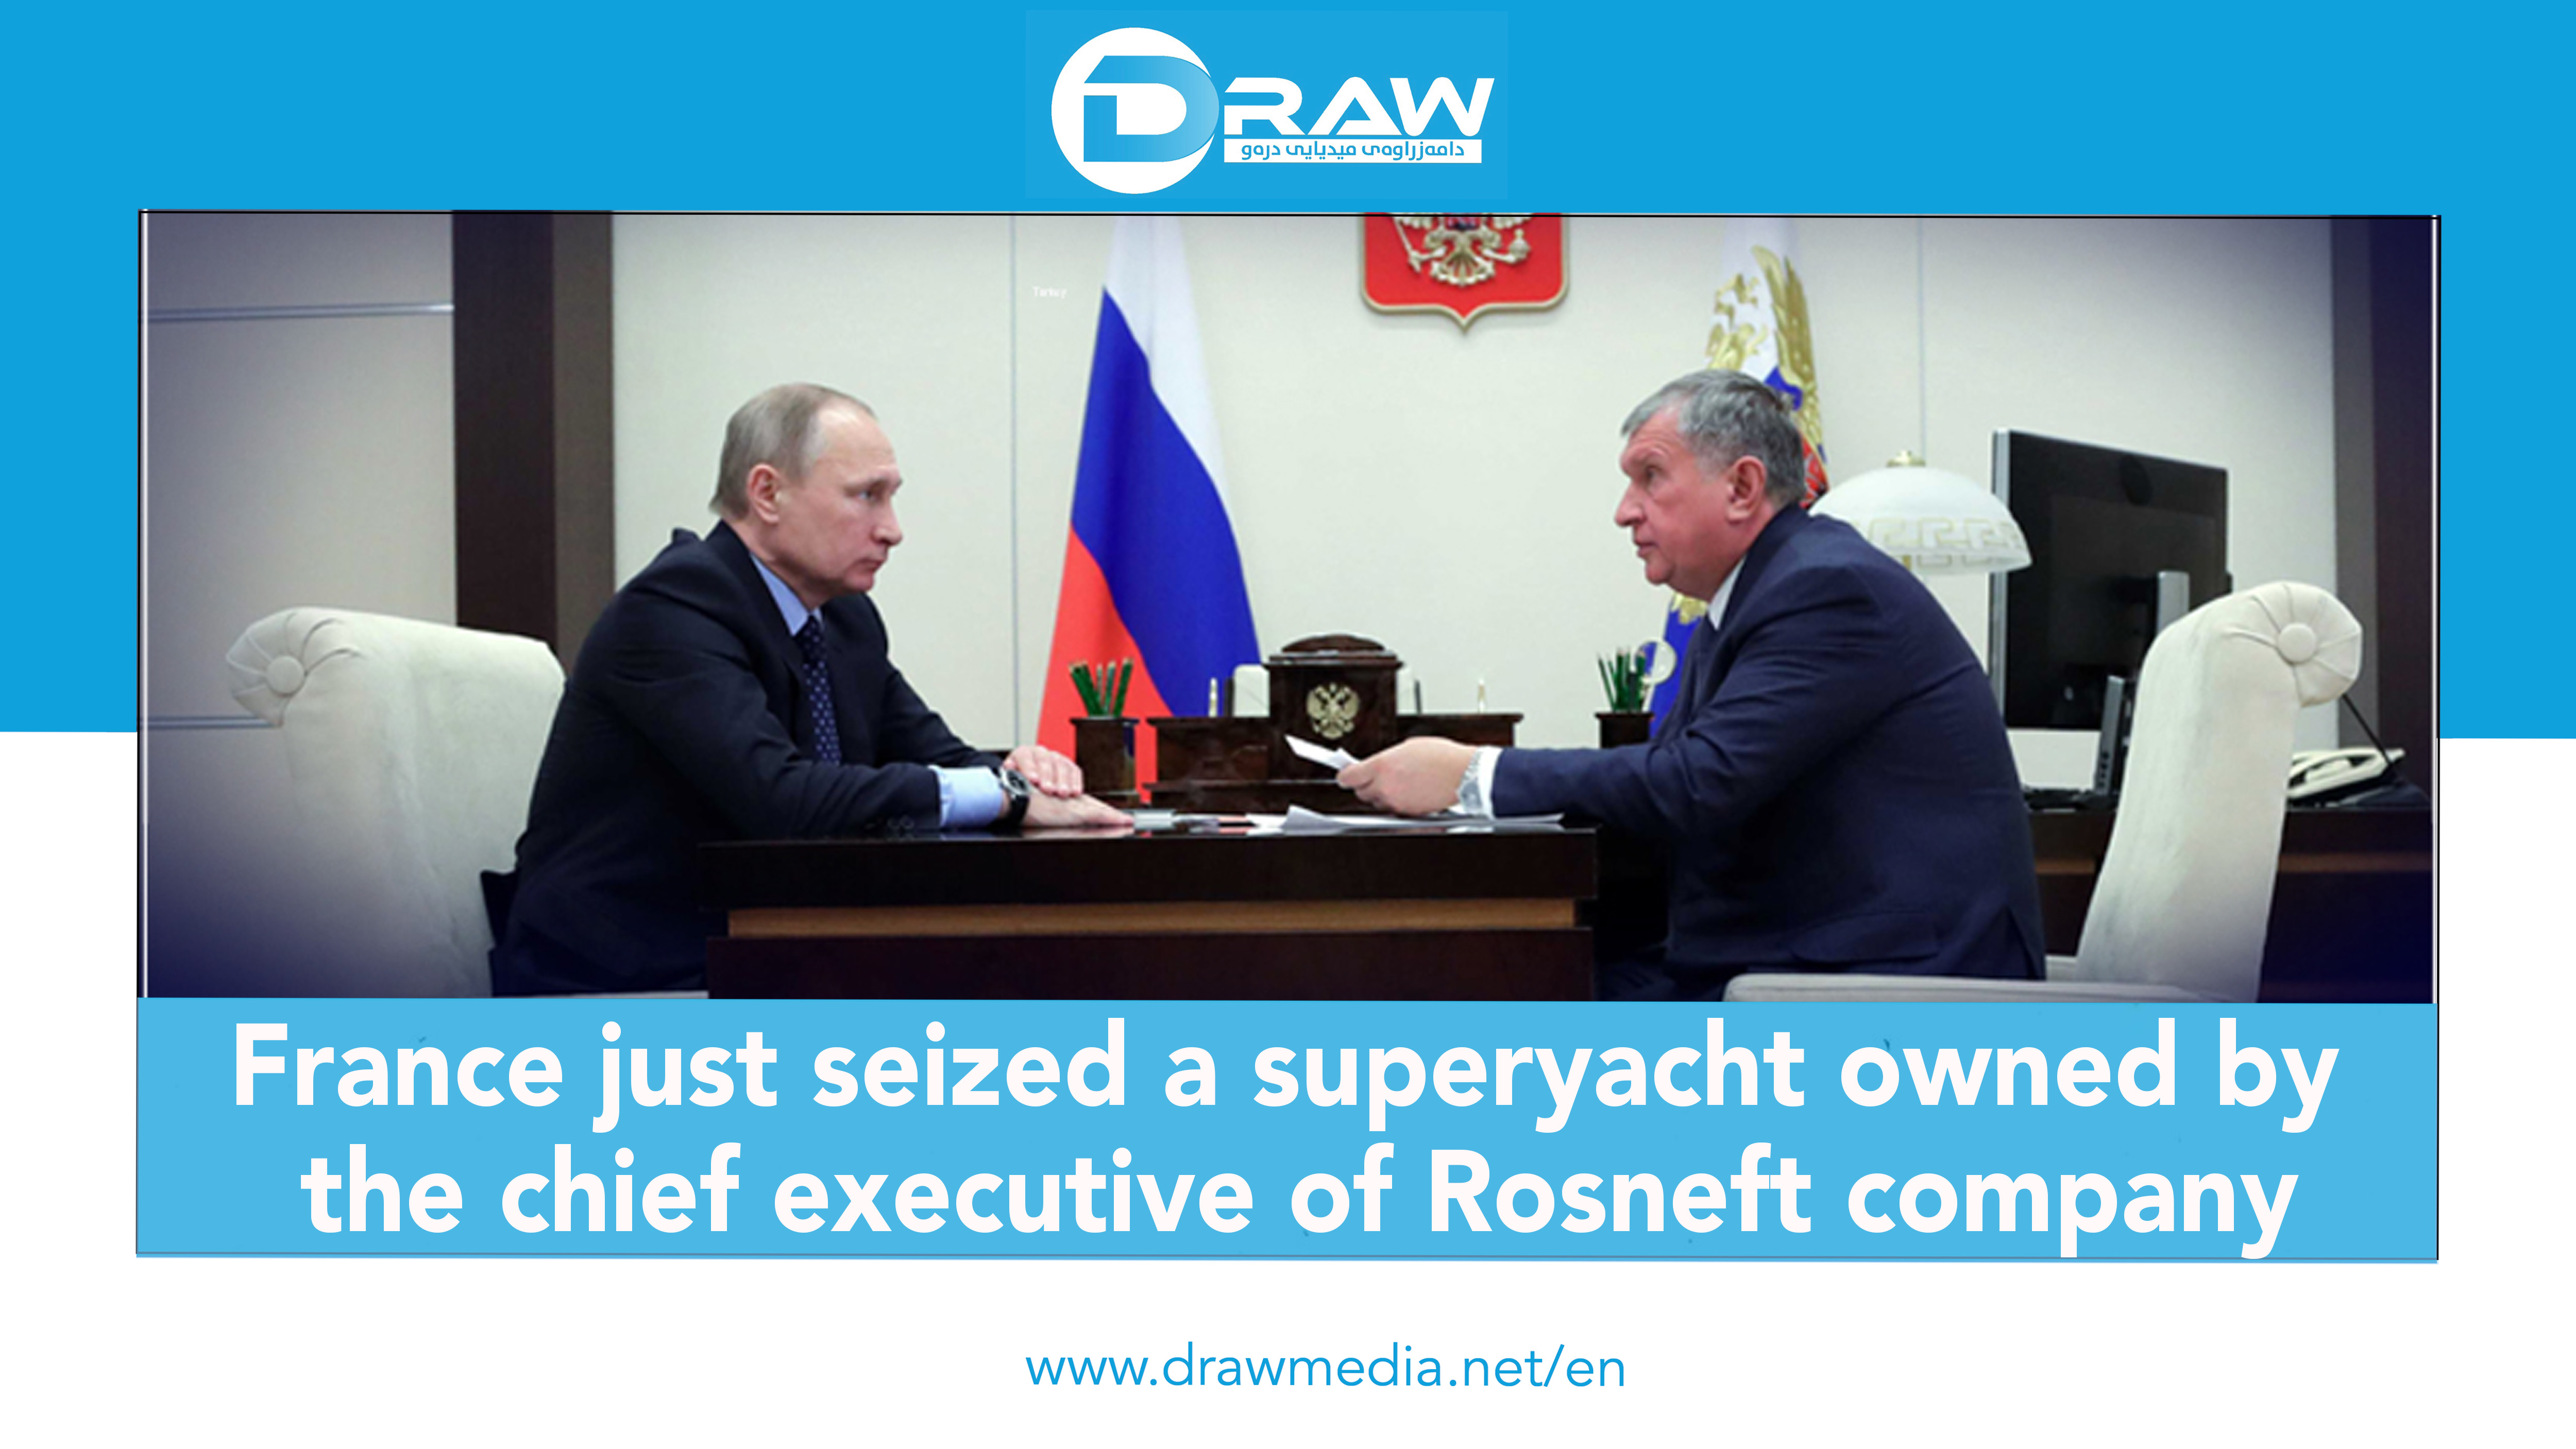 DrawMedia.net / France just seized a superyacht owned by the chief executive of Rosneft company